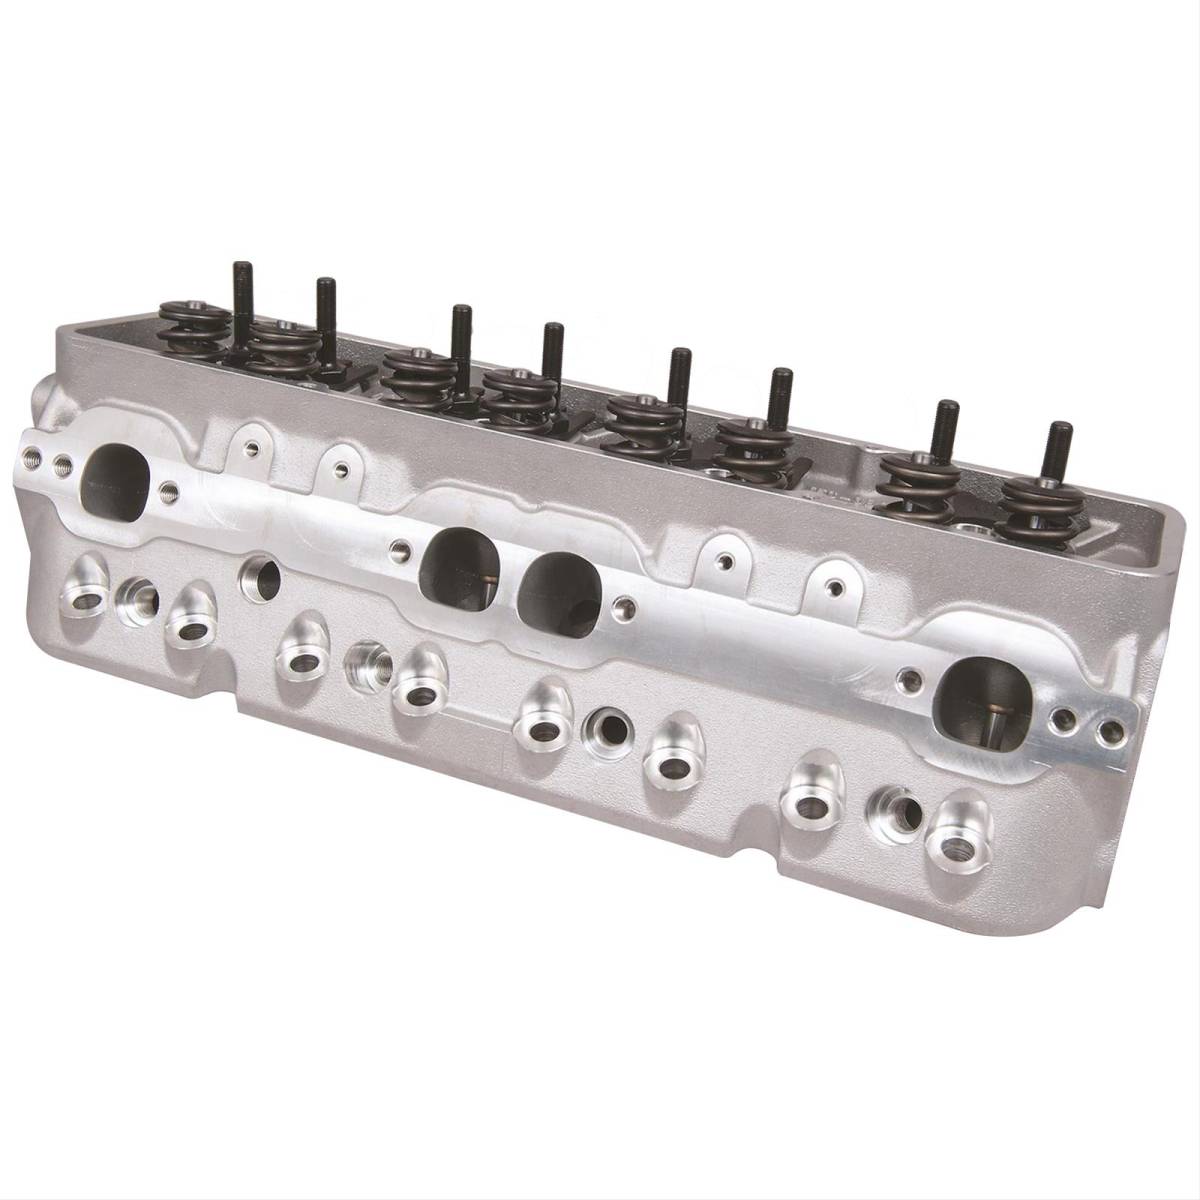 Trickflow - Trickflow Super 23 Cylinder Heads, SB Chevy, 195cc Intake, 62cc Chambers, 1.470" Springs, Center Bolt - Image 1